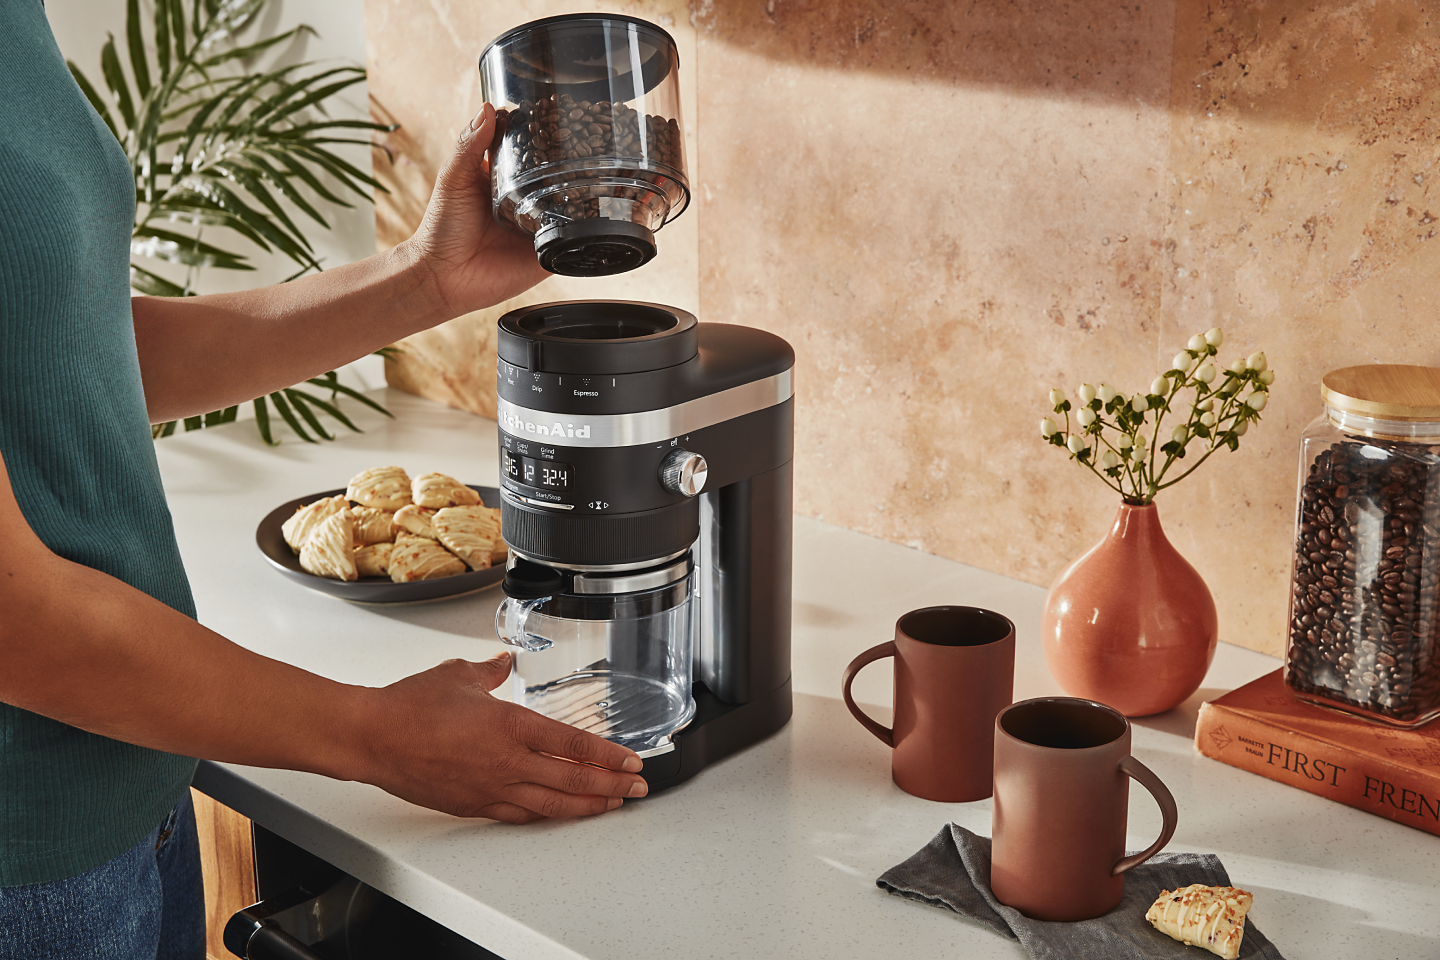 Can You Use Other Appliances or Items to Grind Coffee Beans